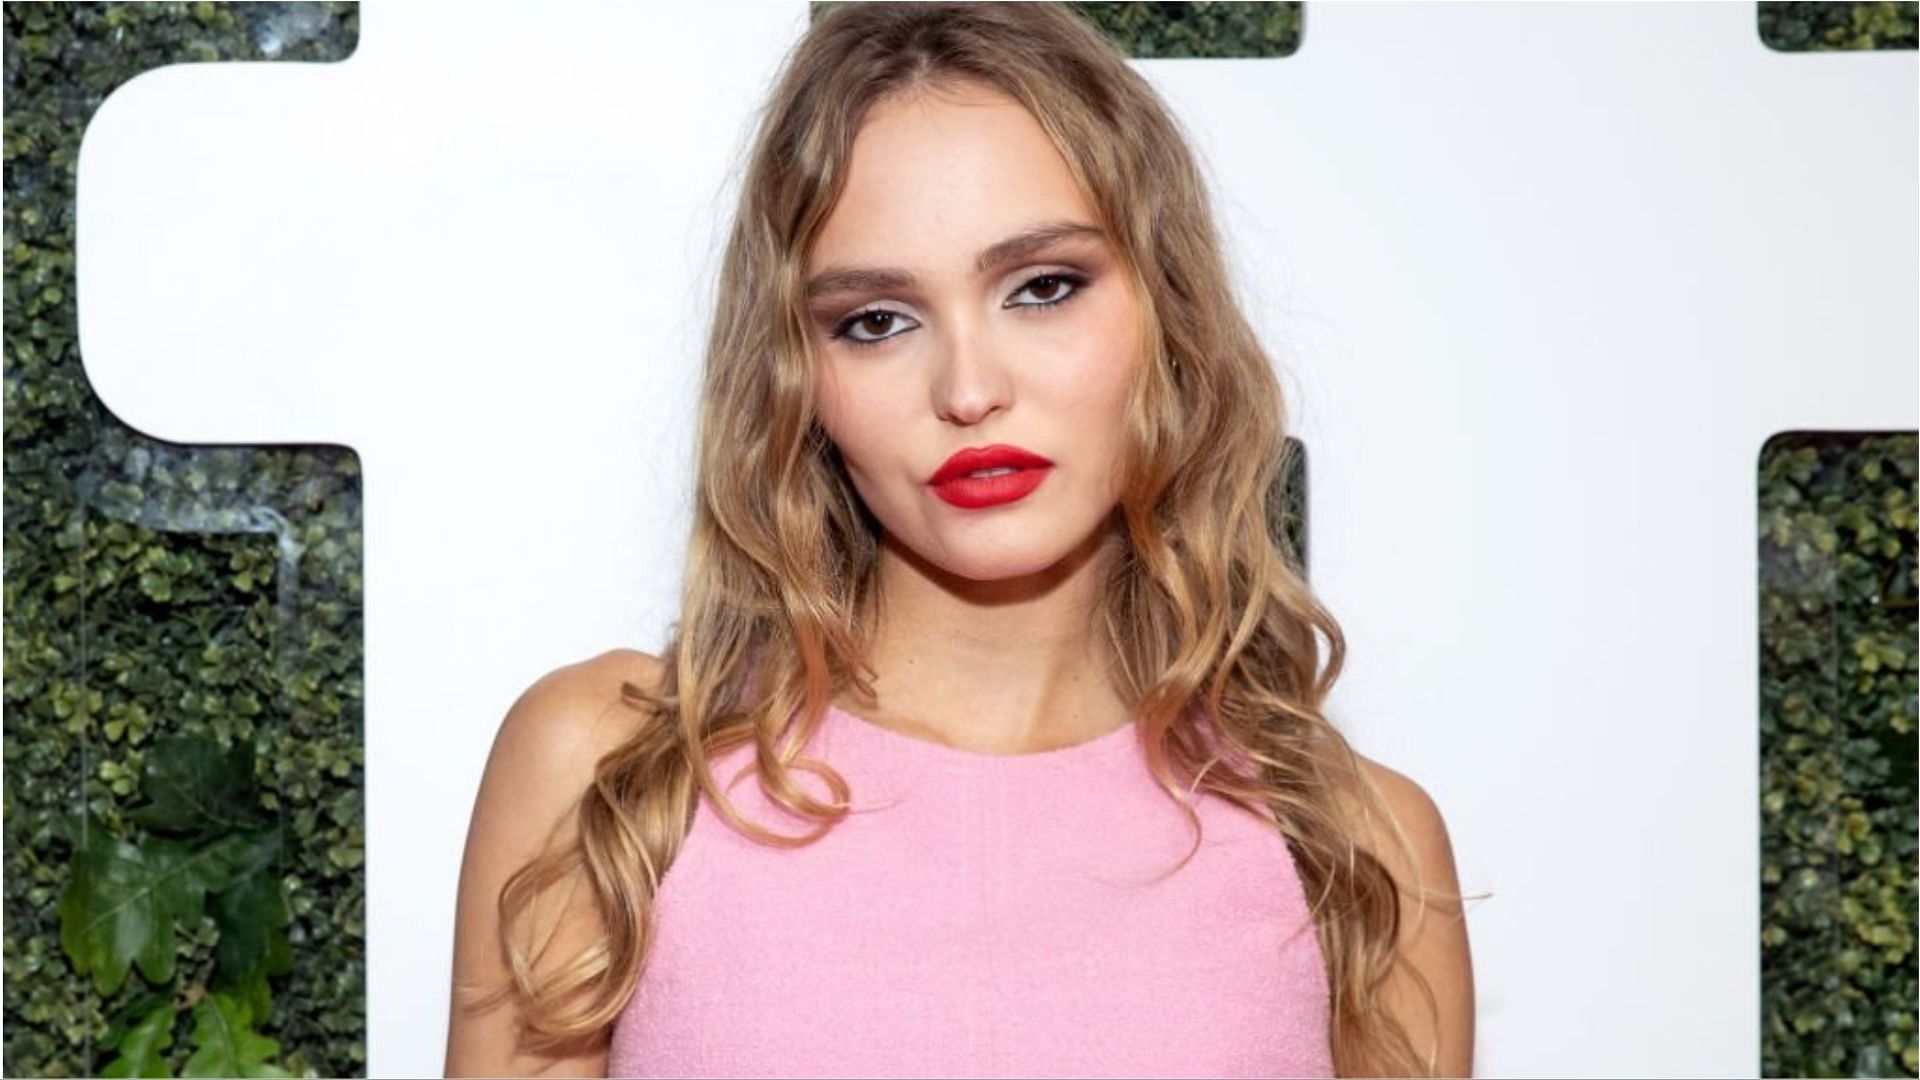 Lily-Rose Depp has never revealed much about her personal life (Image via Emma McIntyre/Getty Images)